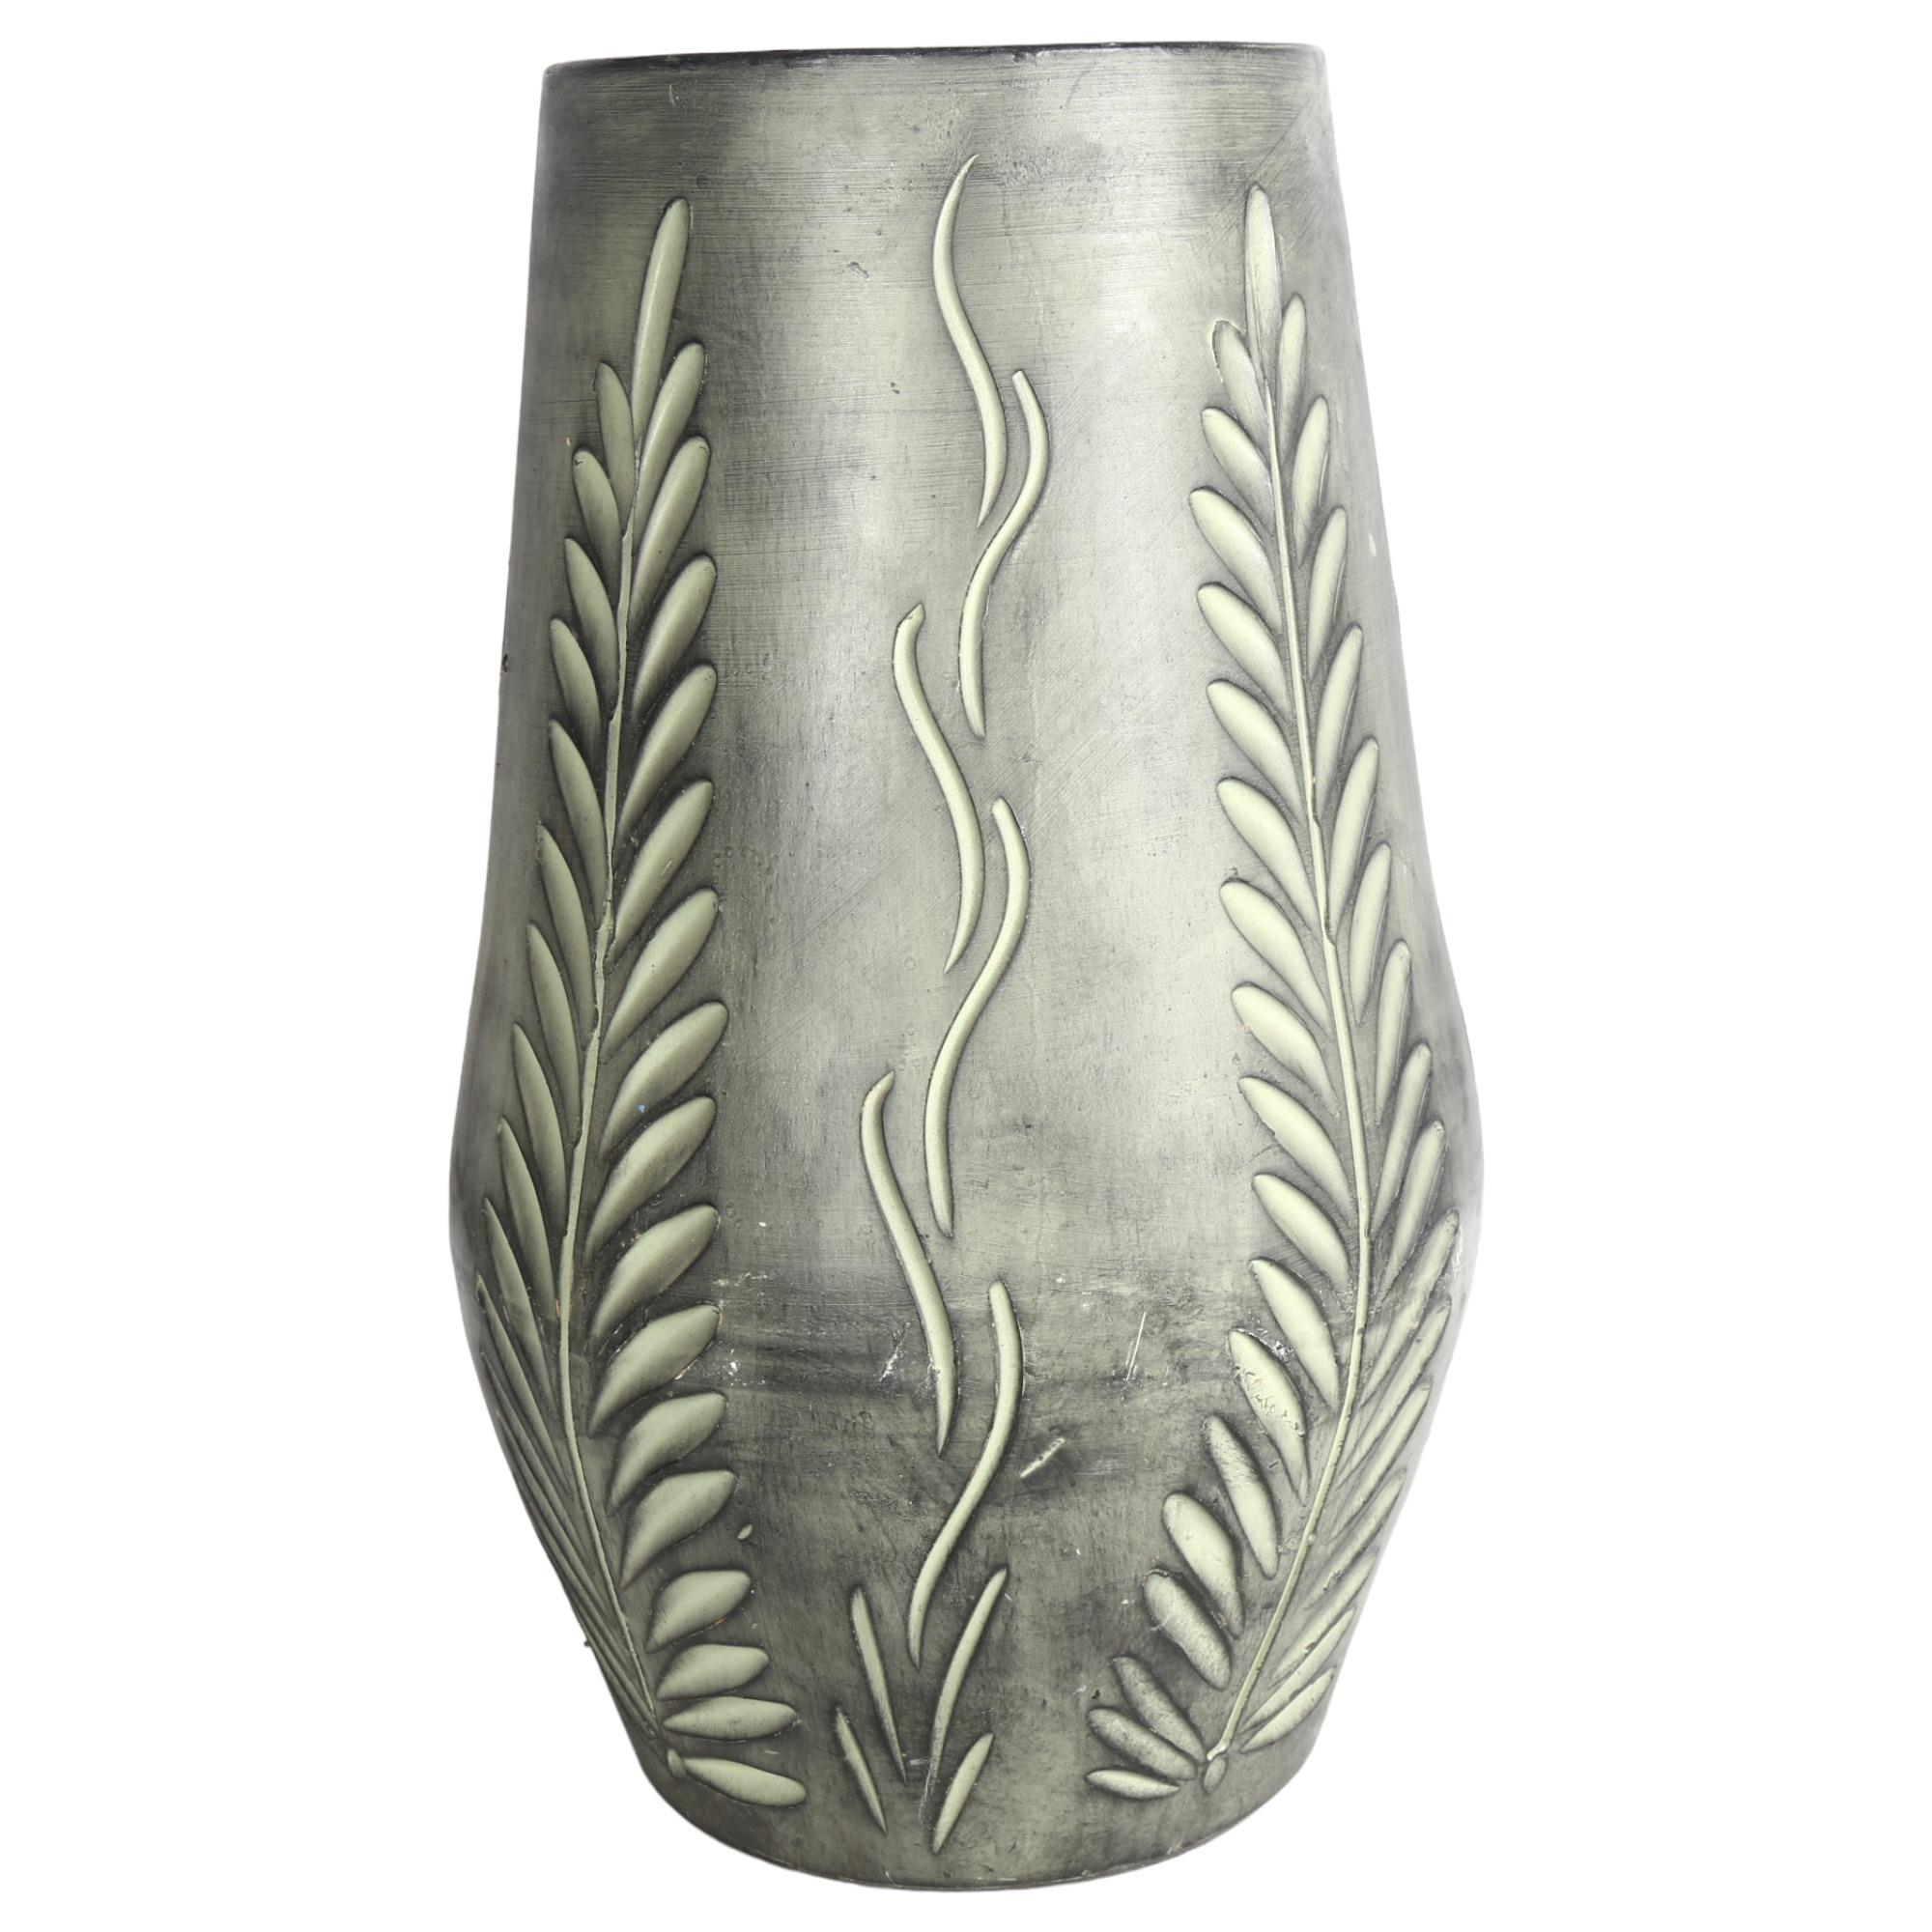 A large green glazed incised pottery vase, with foliate decoration, 48cm